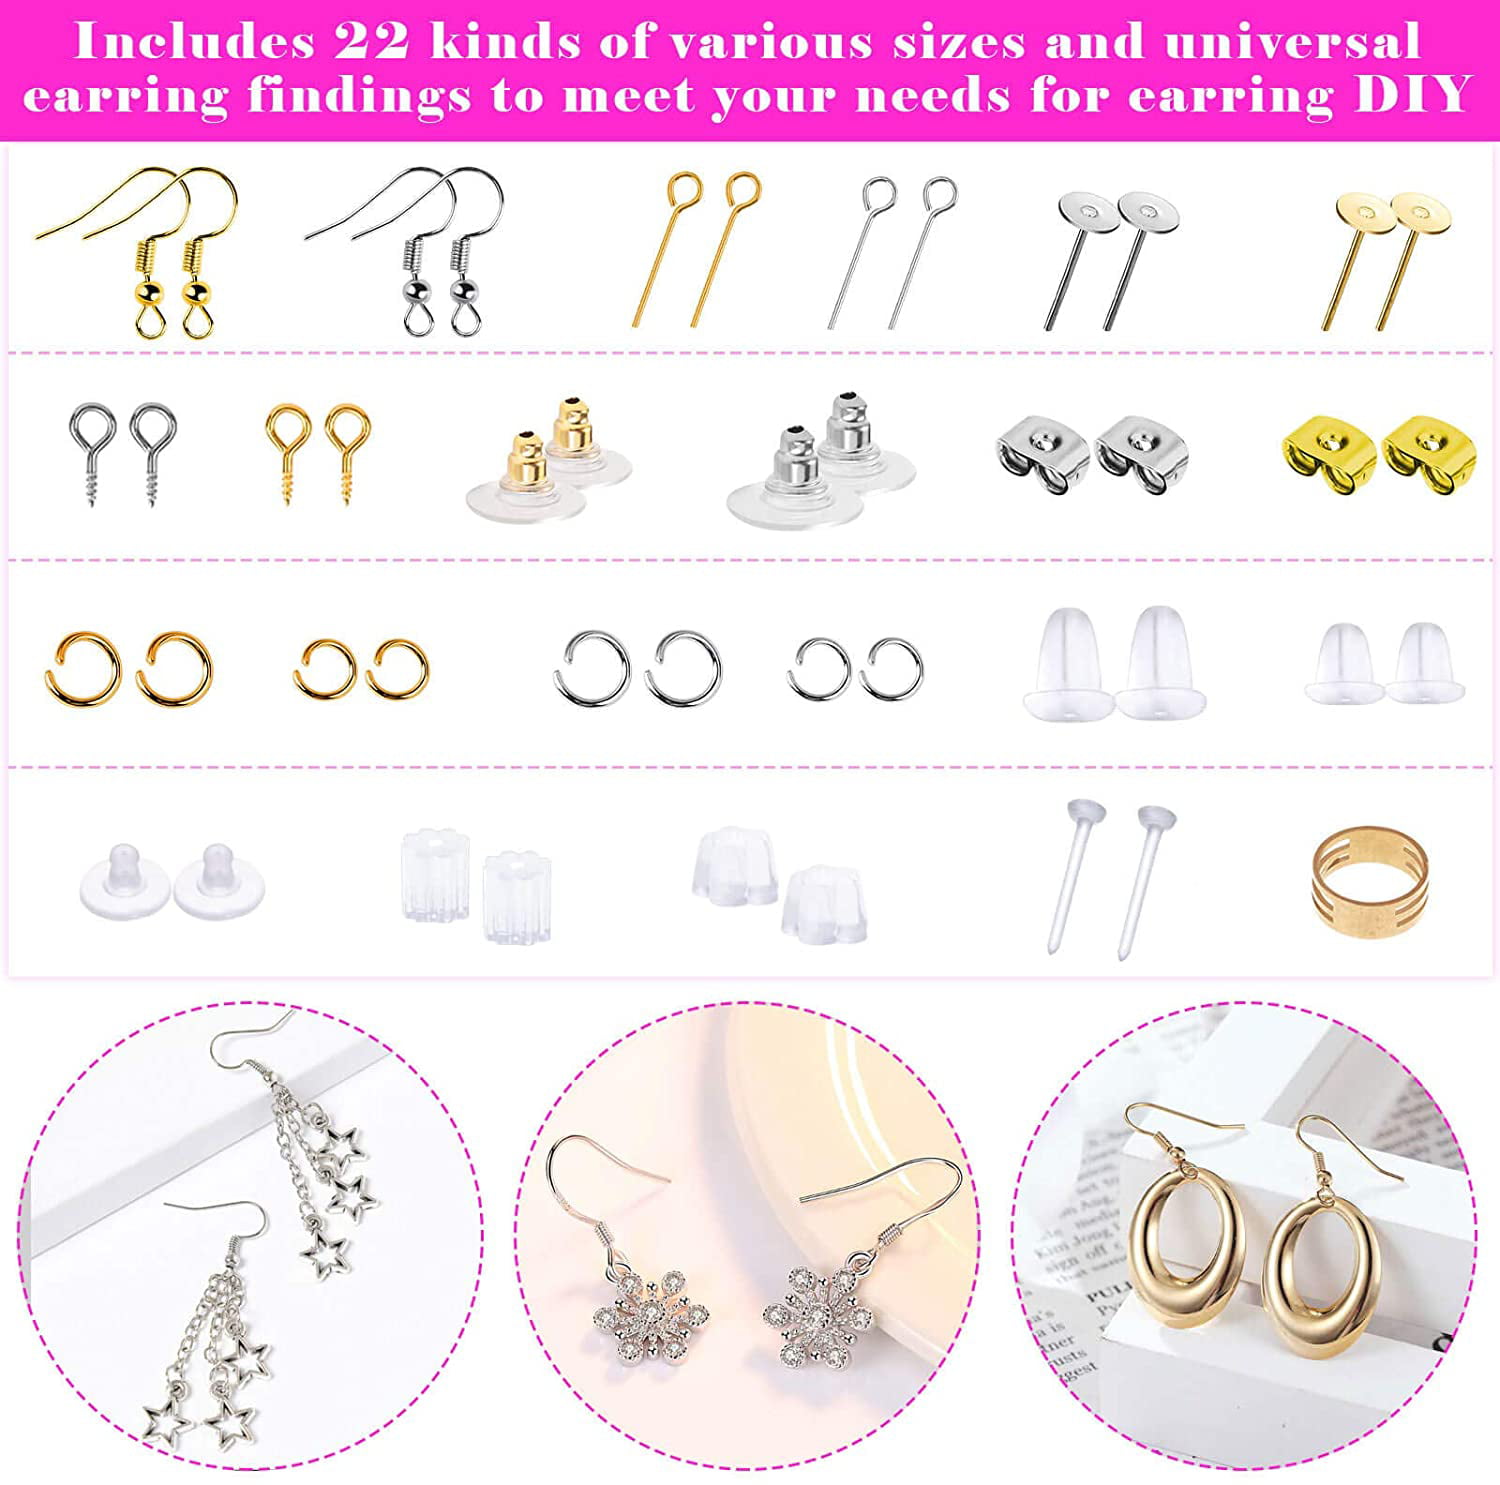 LANMOK Earring Making Supplies, 2410pcs Jewelry Making Kits in Earring  Backs Earring Hooks Earring Posts for DIY Beginners Adults Crafters